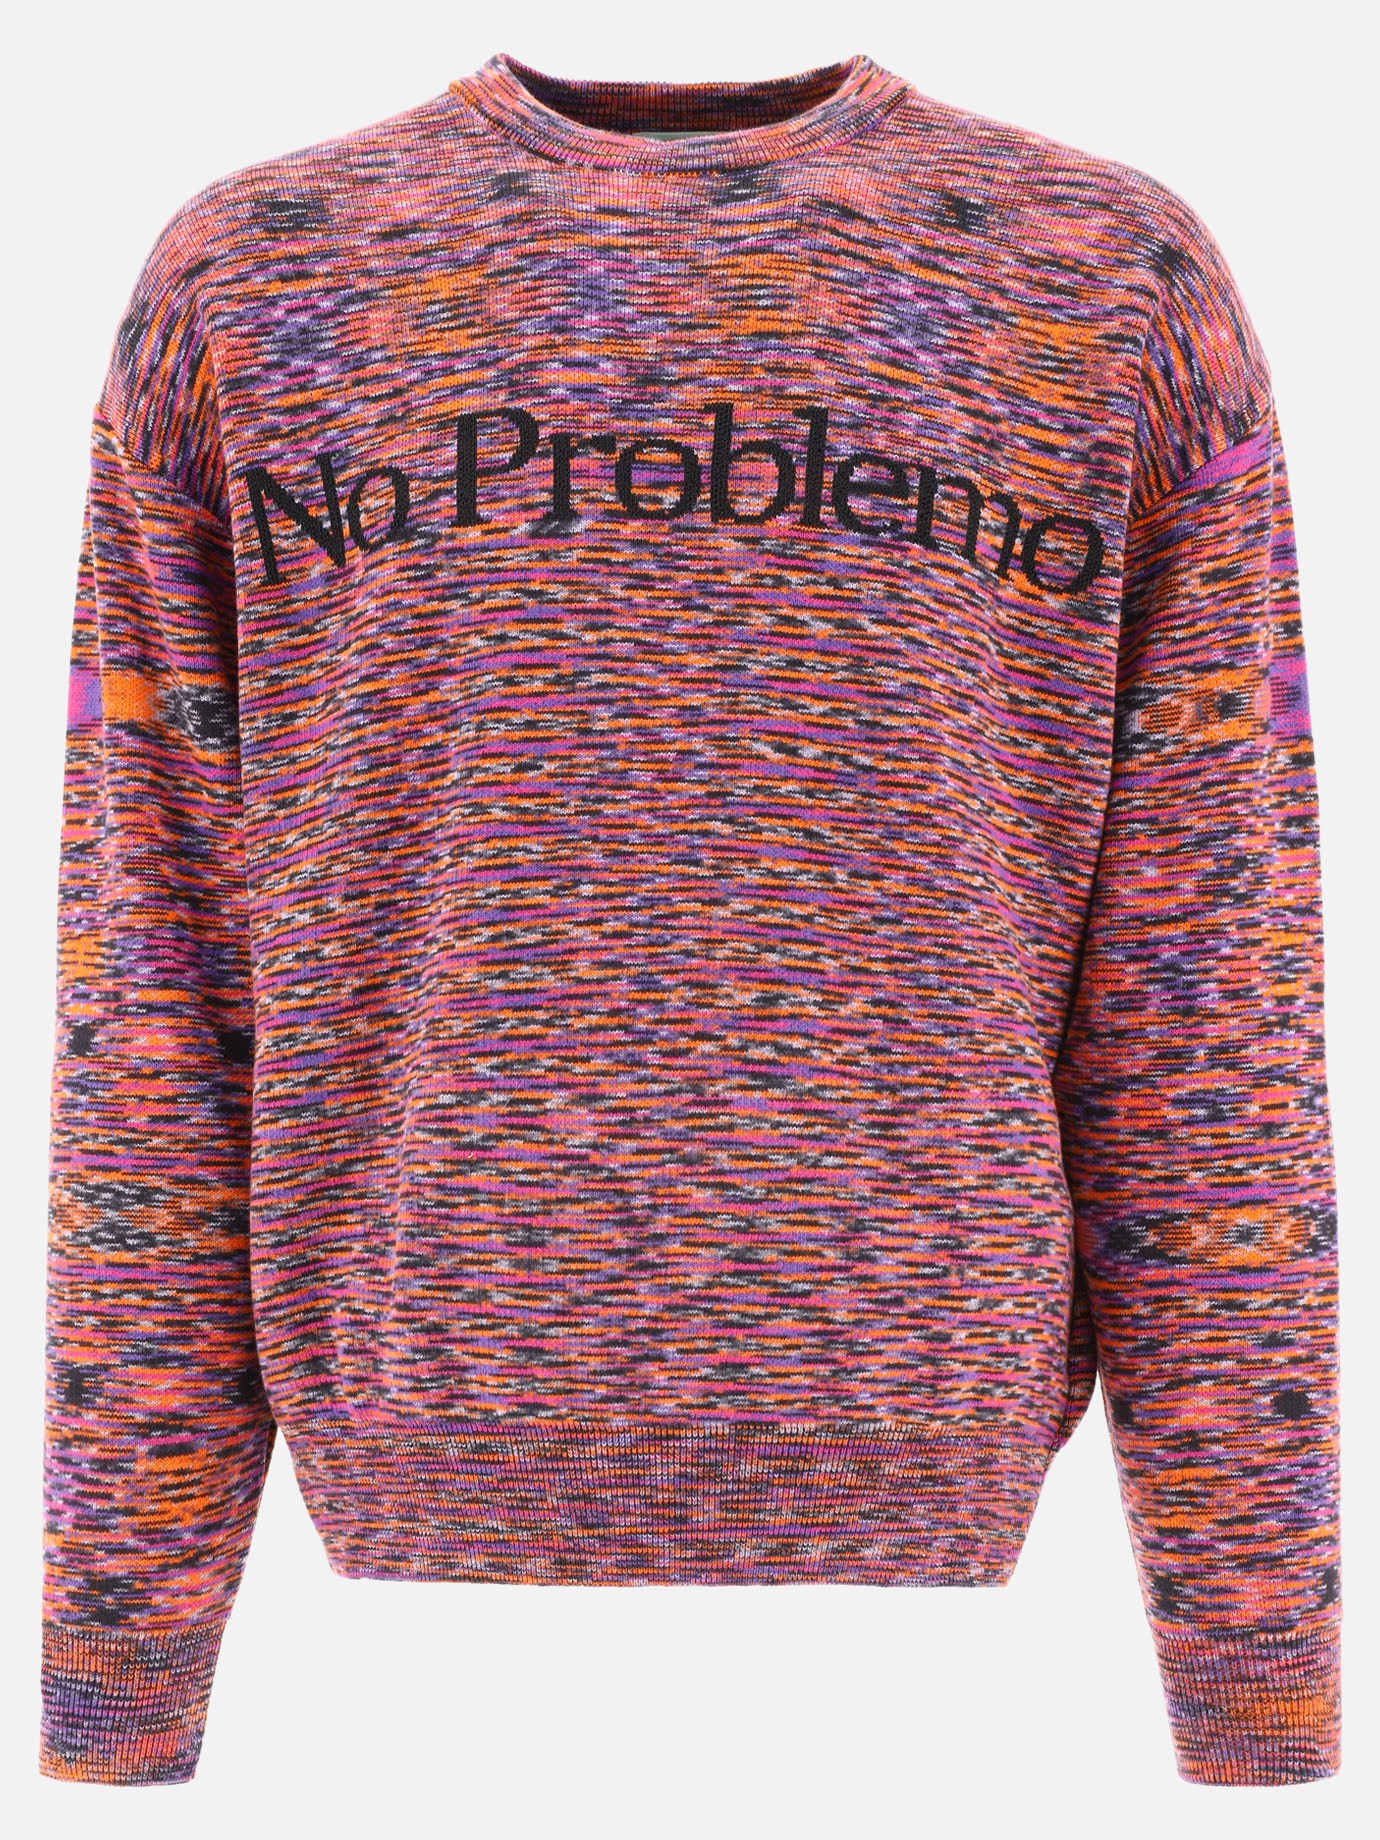  No Problemo  sweaterby Aries - 3